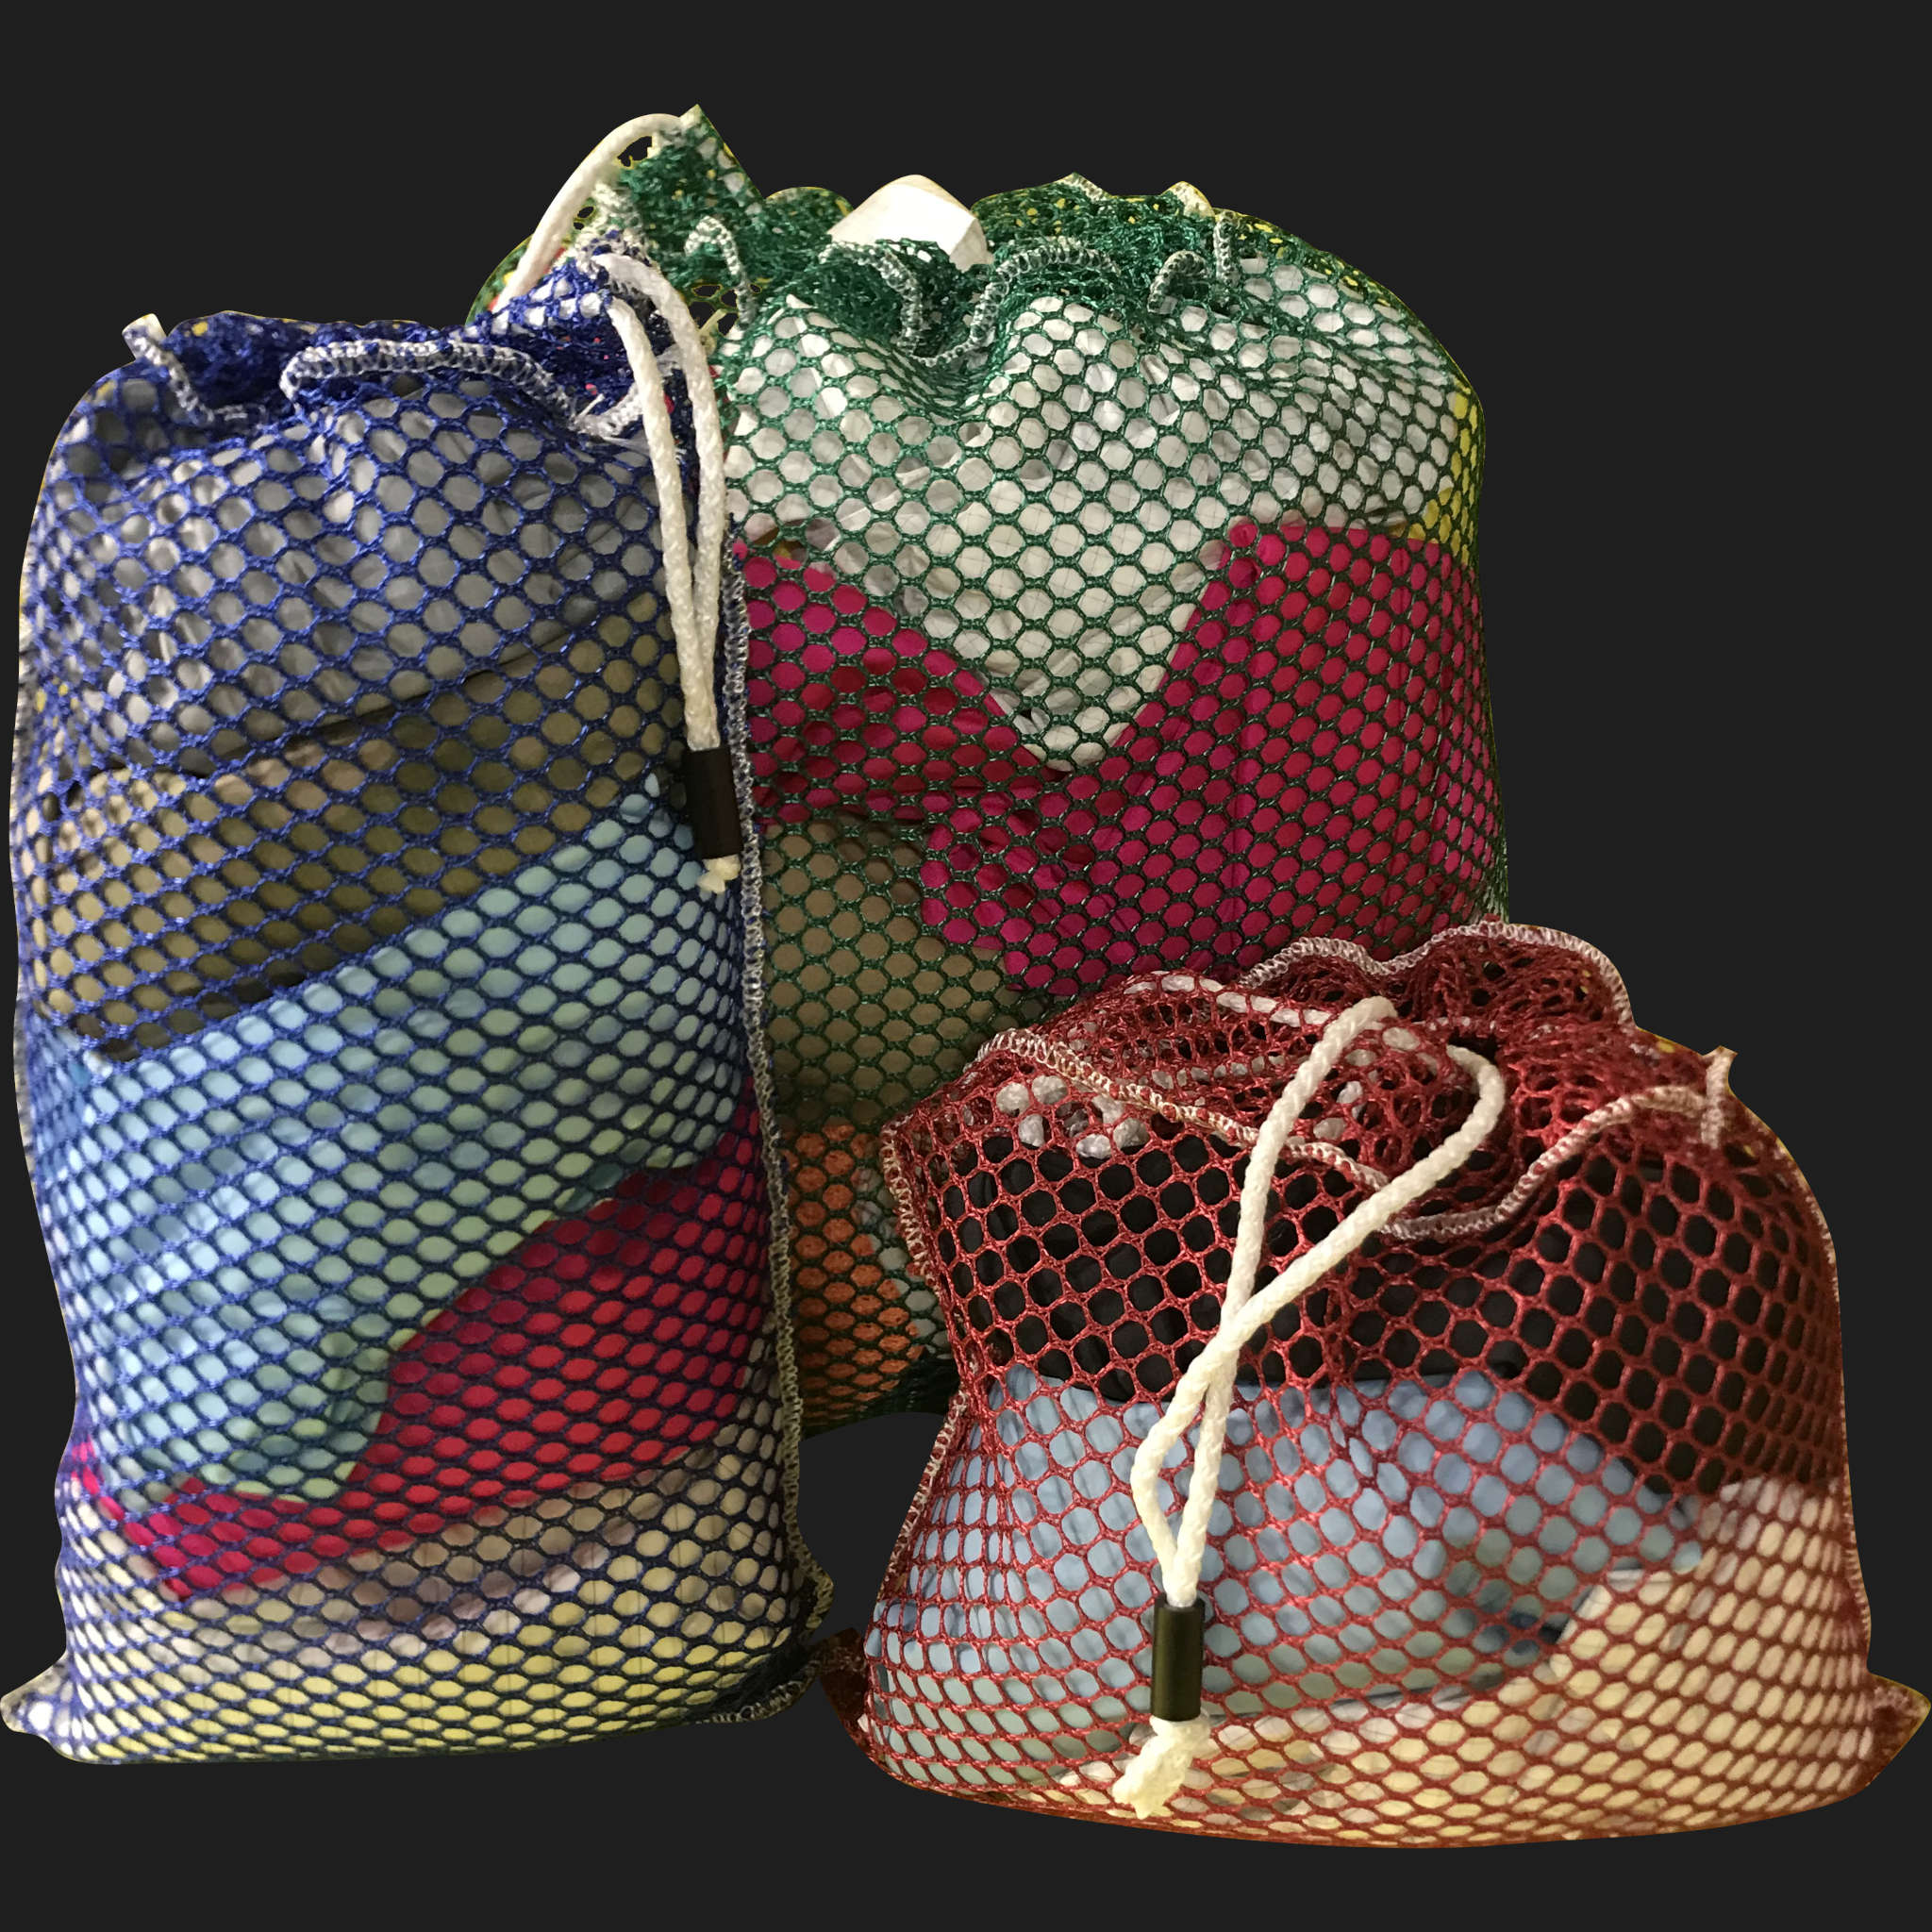 40" x 60" Customized Mesh-Net-Laundry Bags Heavy Duty with Cord and barrellock closure